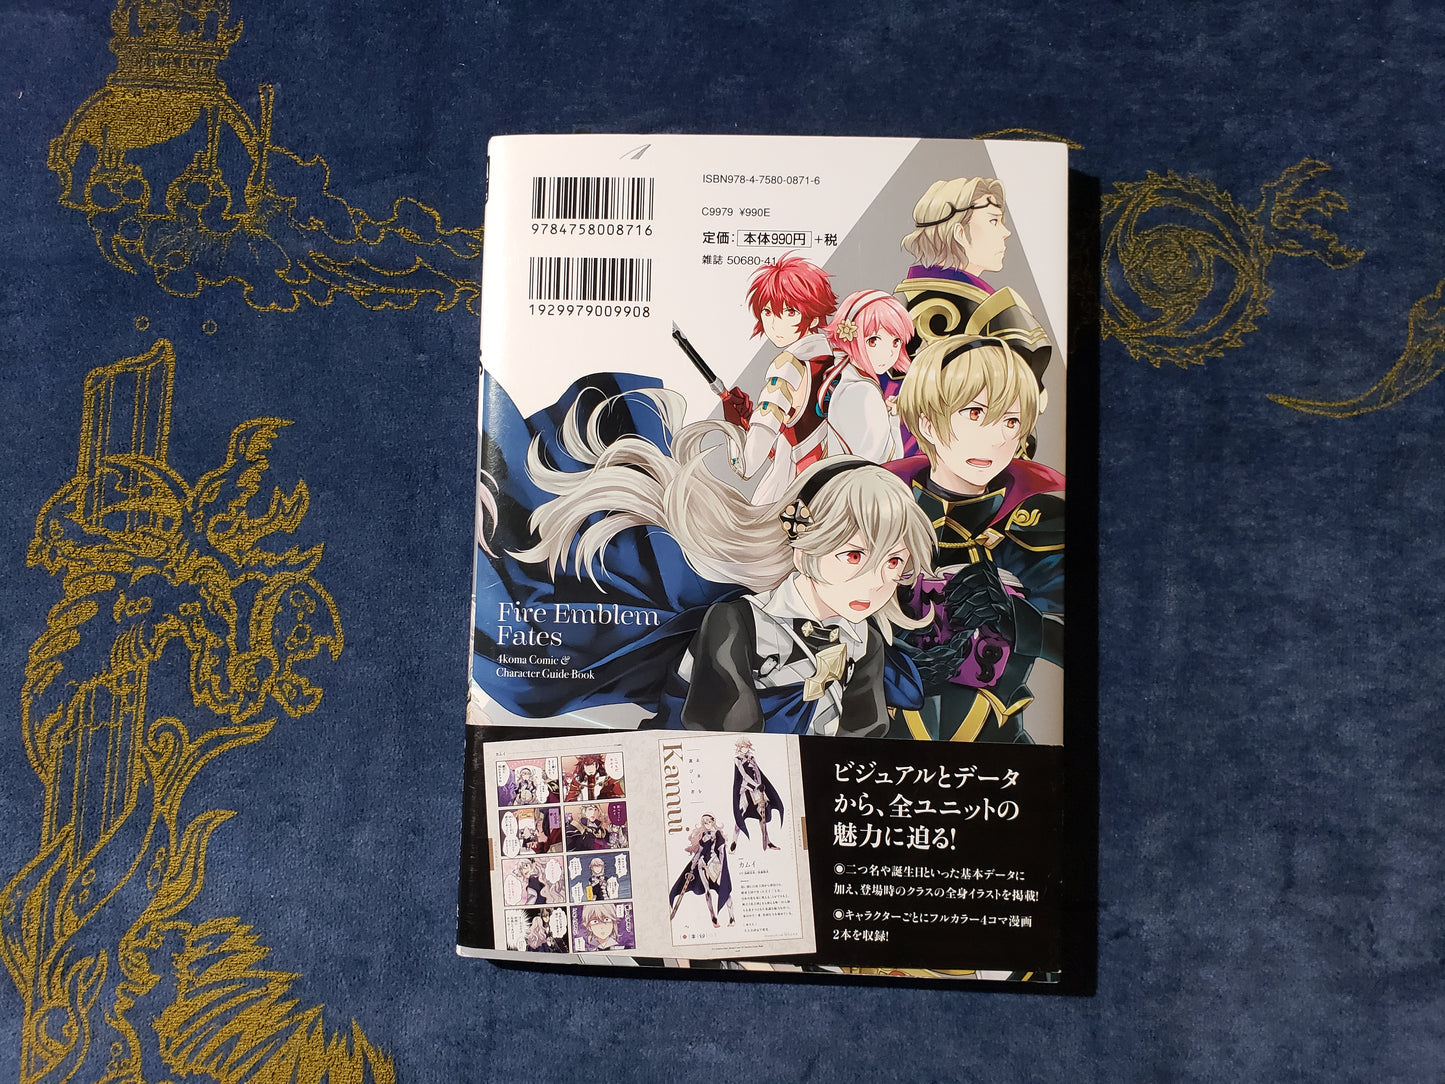 Fates character guidebook / 4koma Artbook (official)